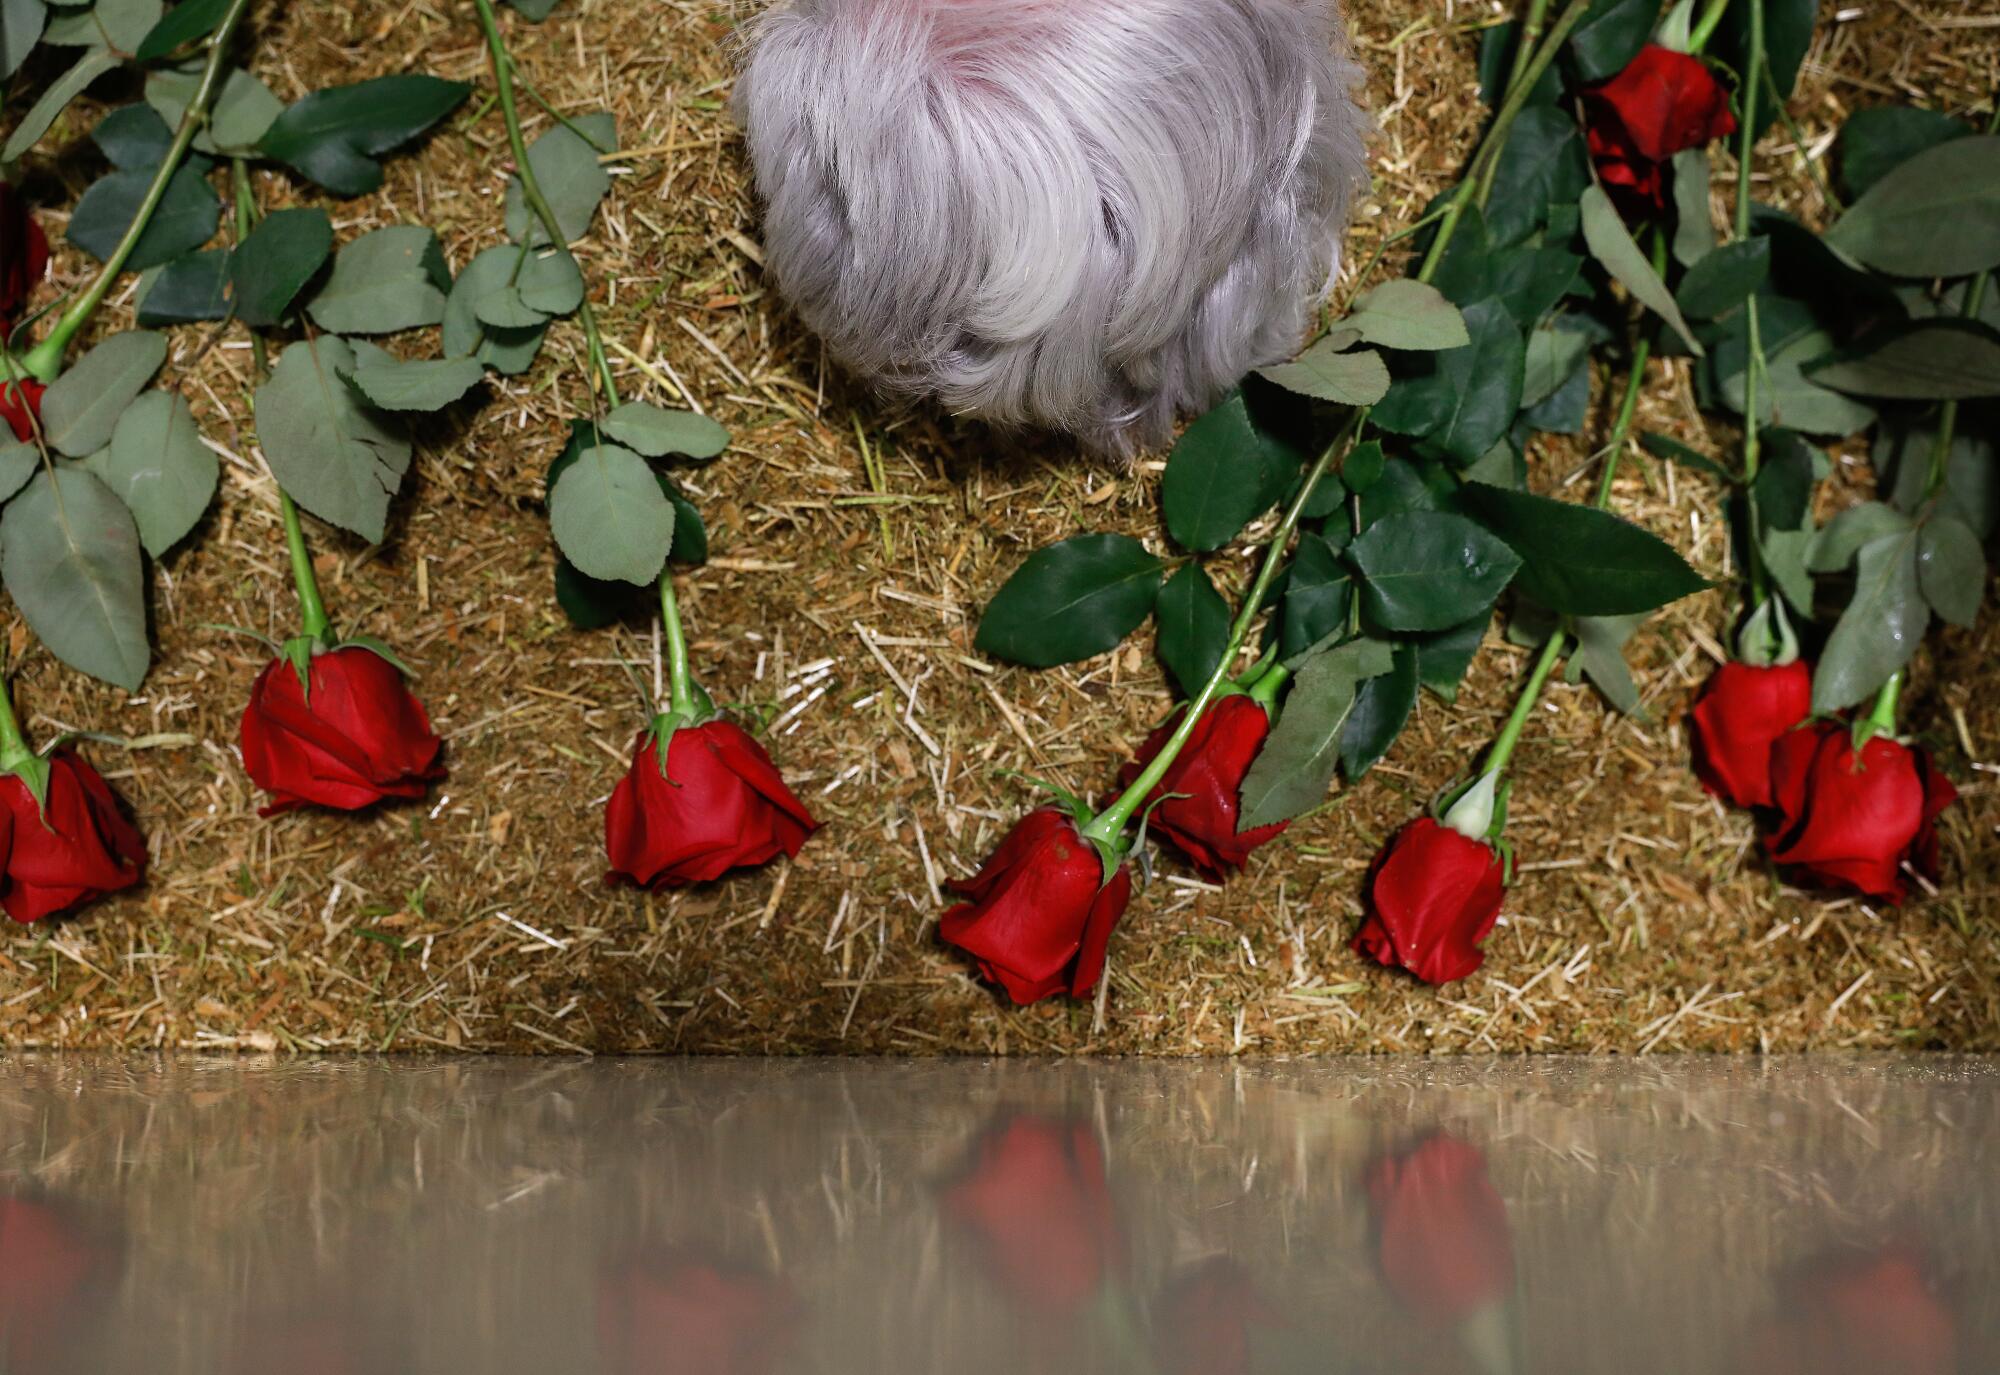 Roses atop a bed of alfalfa, surrounding the head of a deceased woman, whose hair is the only thing visible.